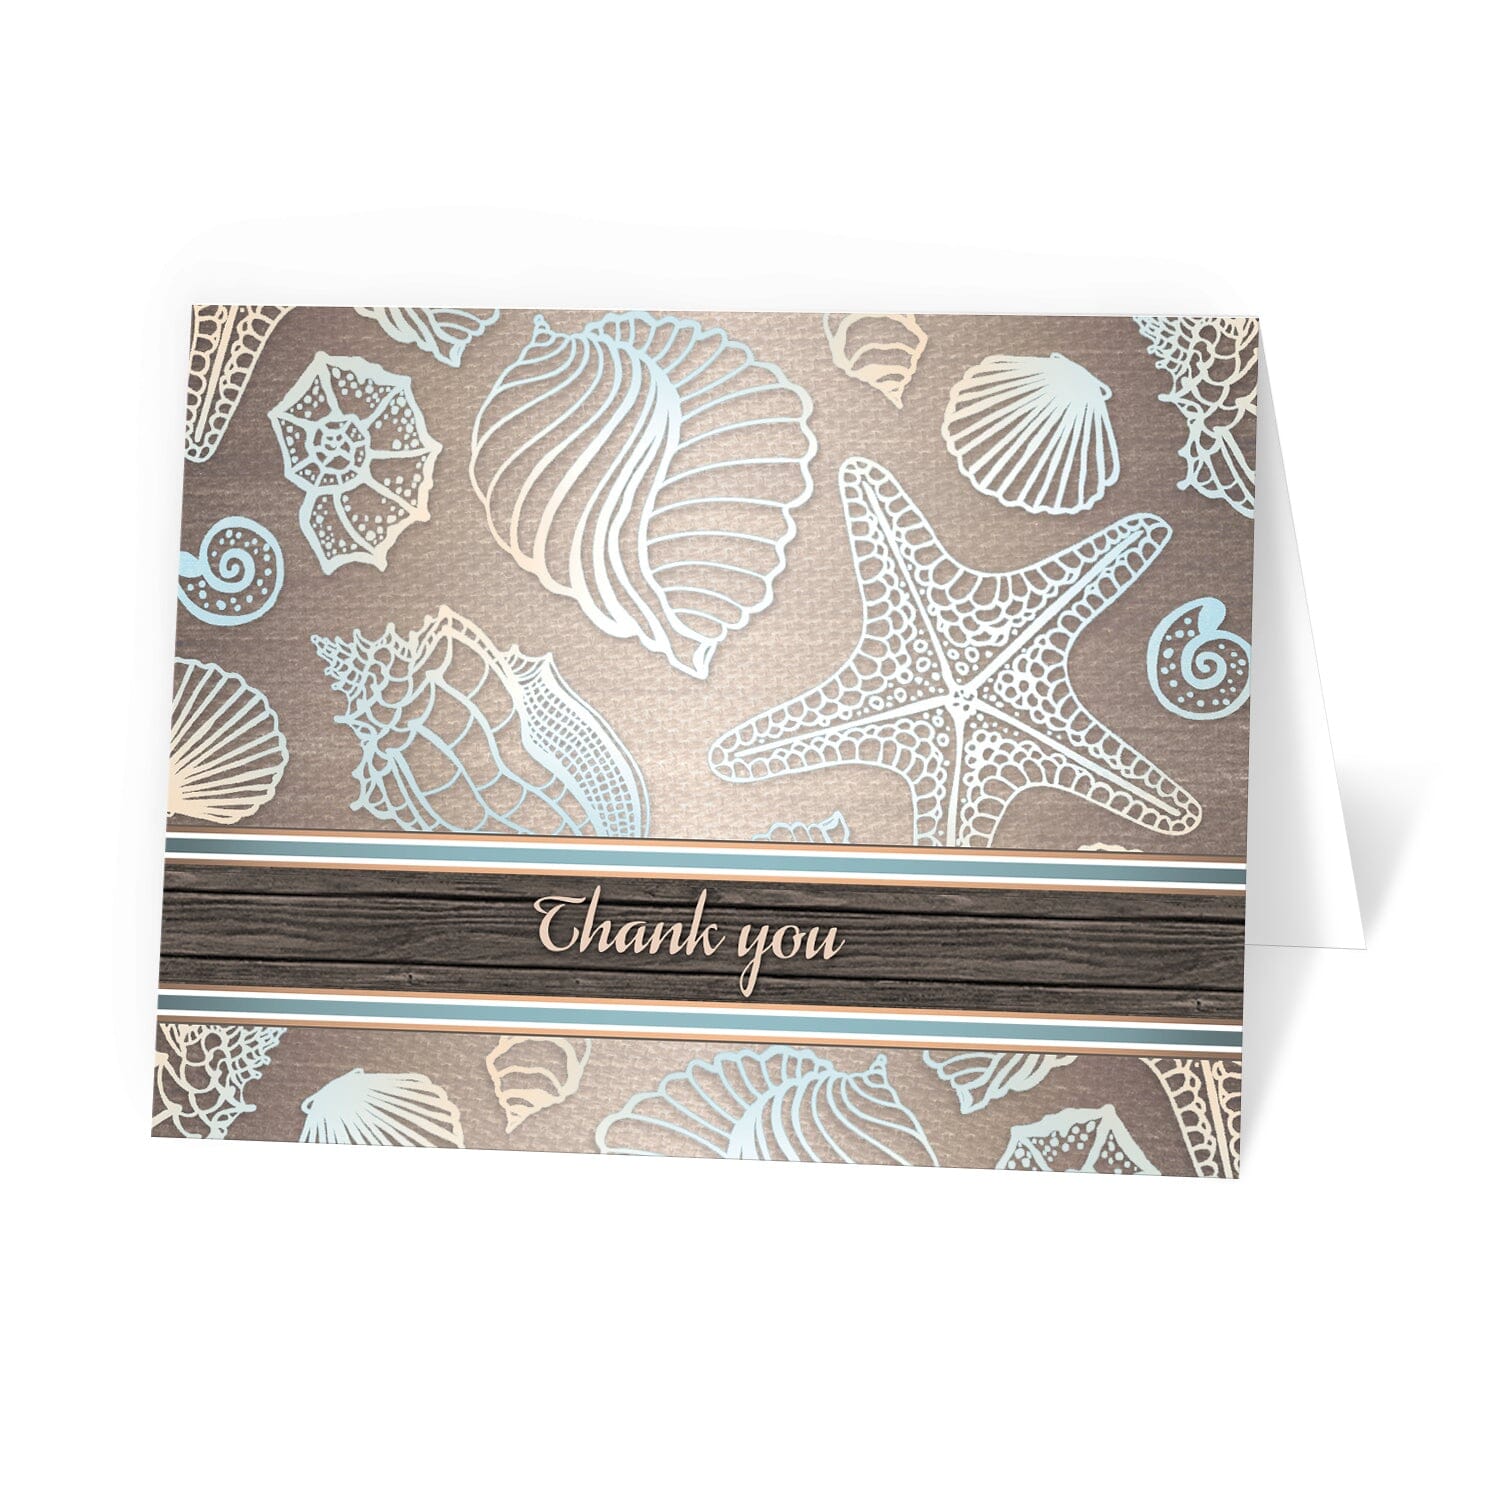 Rustic Wood Beach Seashell Thank You Cards at Artistically Invited.